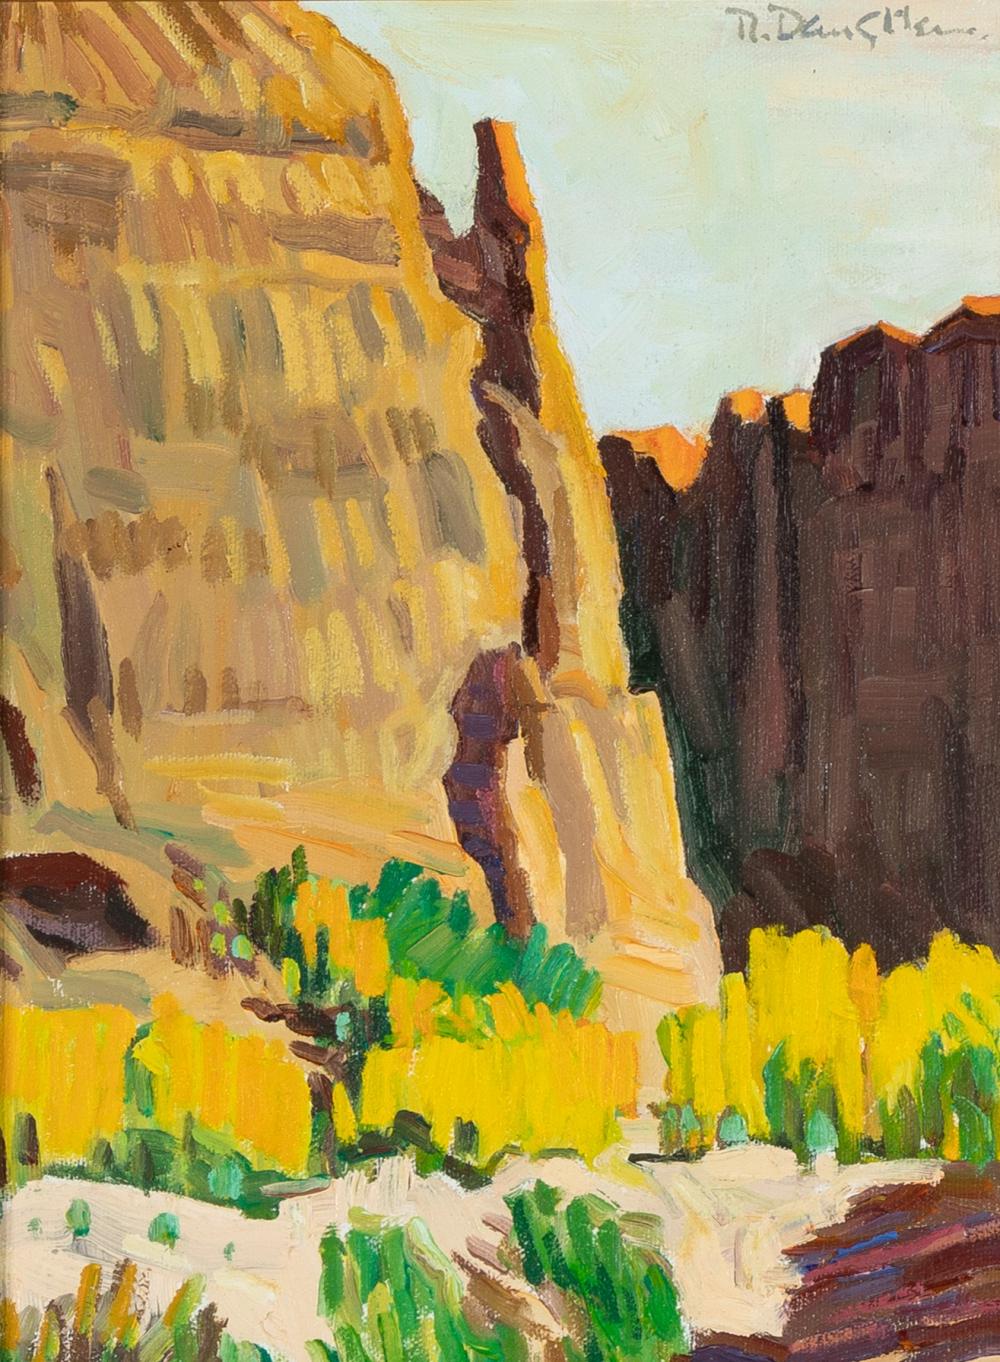 ROBERT DAUGHTERS, UNTITLED (CANYON